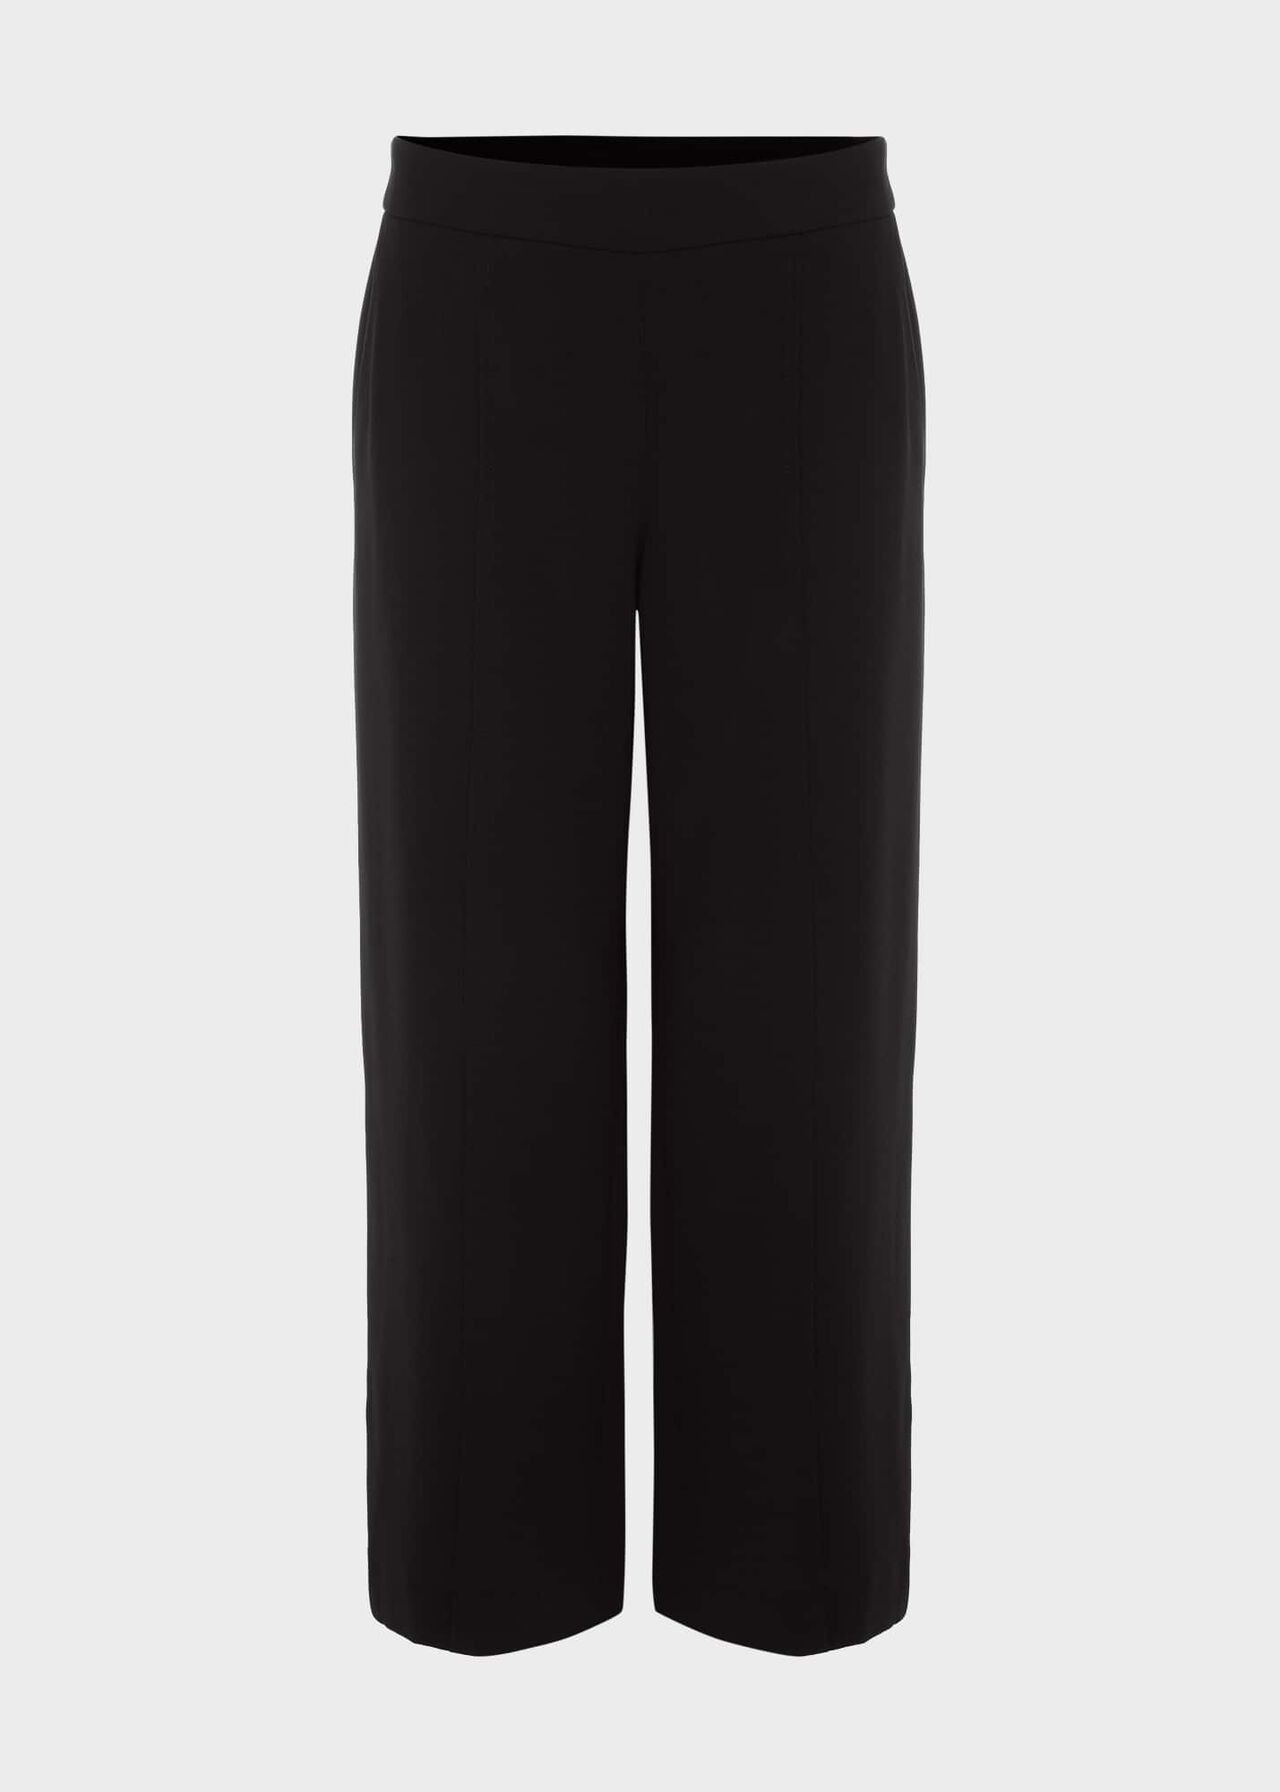 Lula Cropped Trousers With Stretch, Black, hi-res